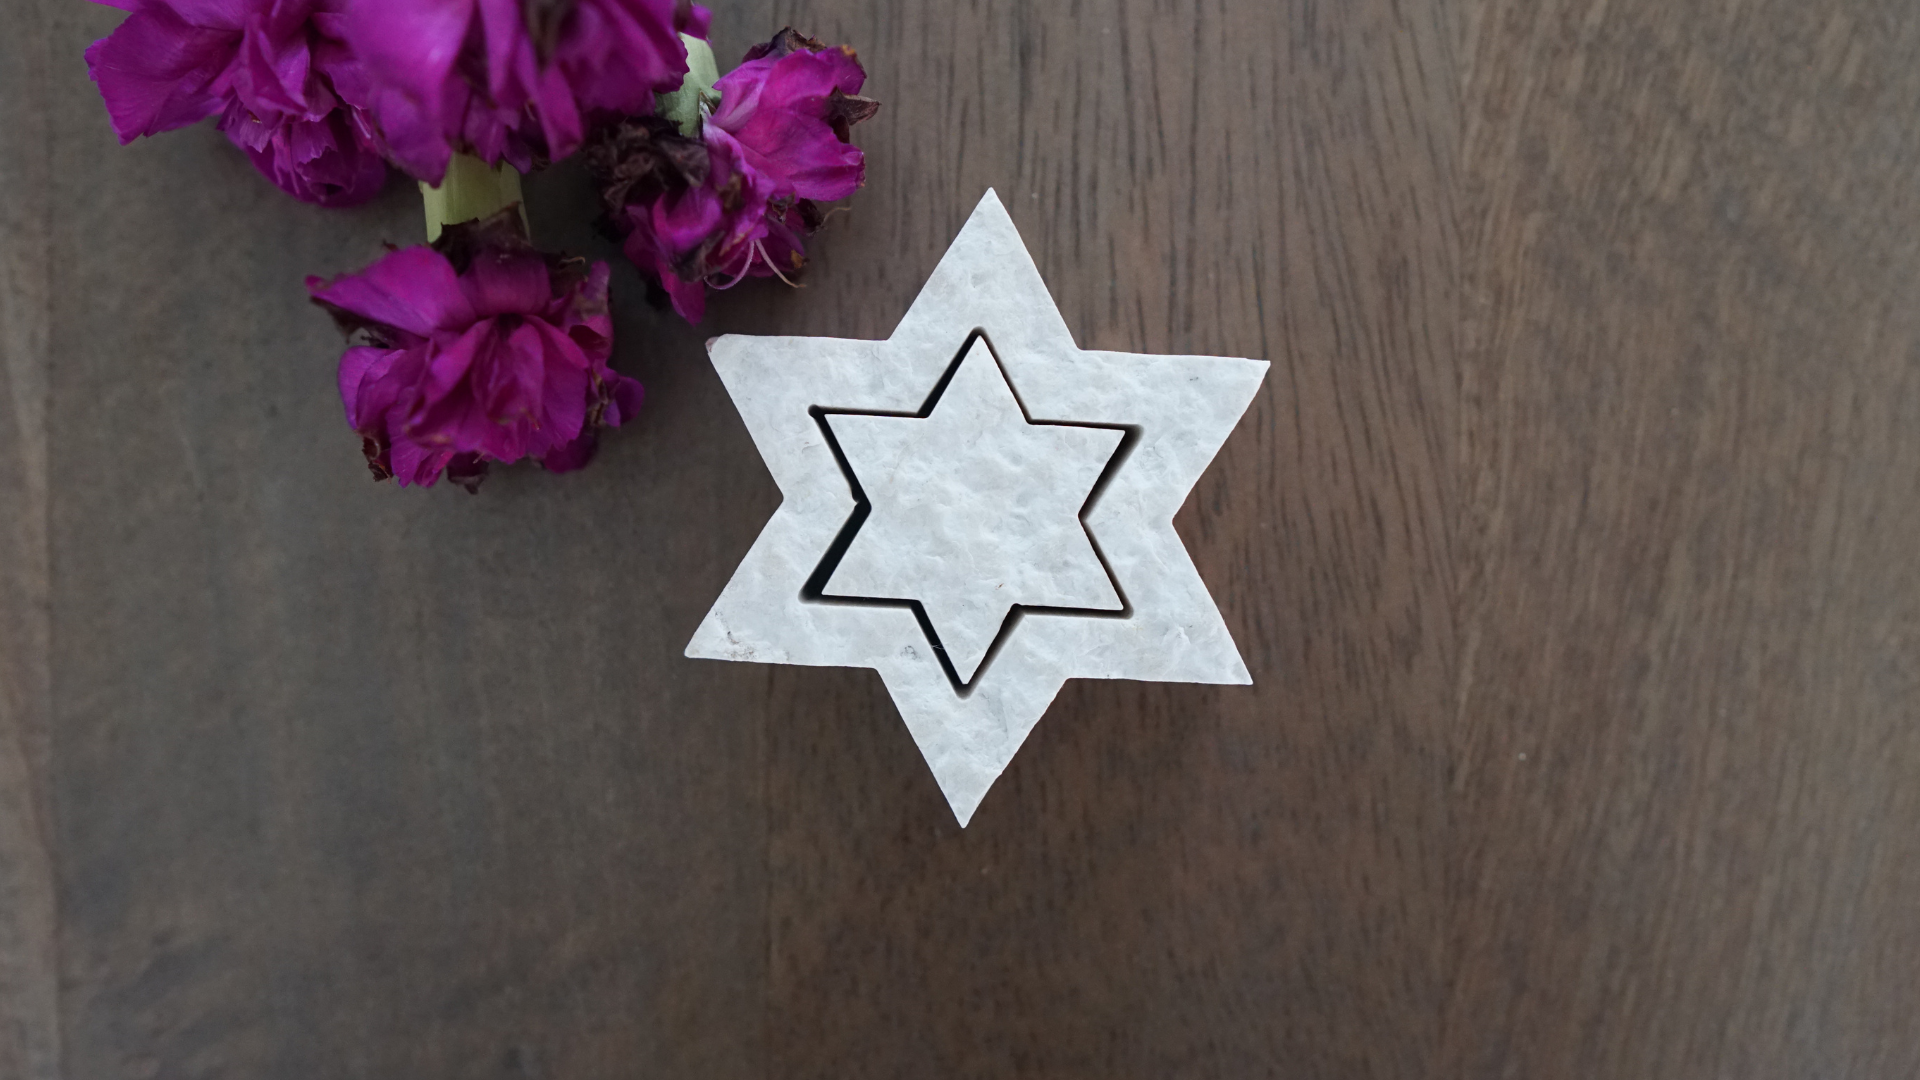 Two piece Star of David made from Jerusalem stone on table with flowers